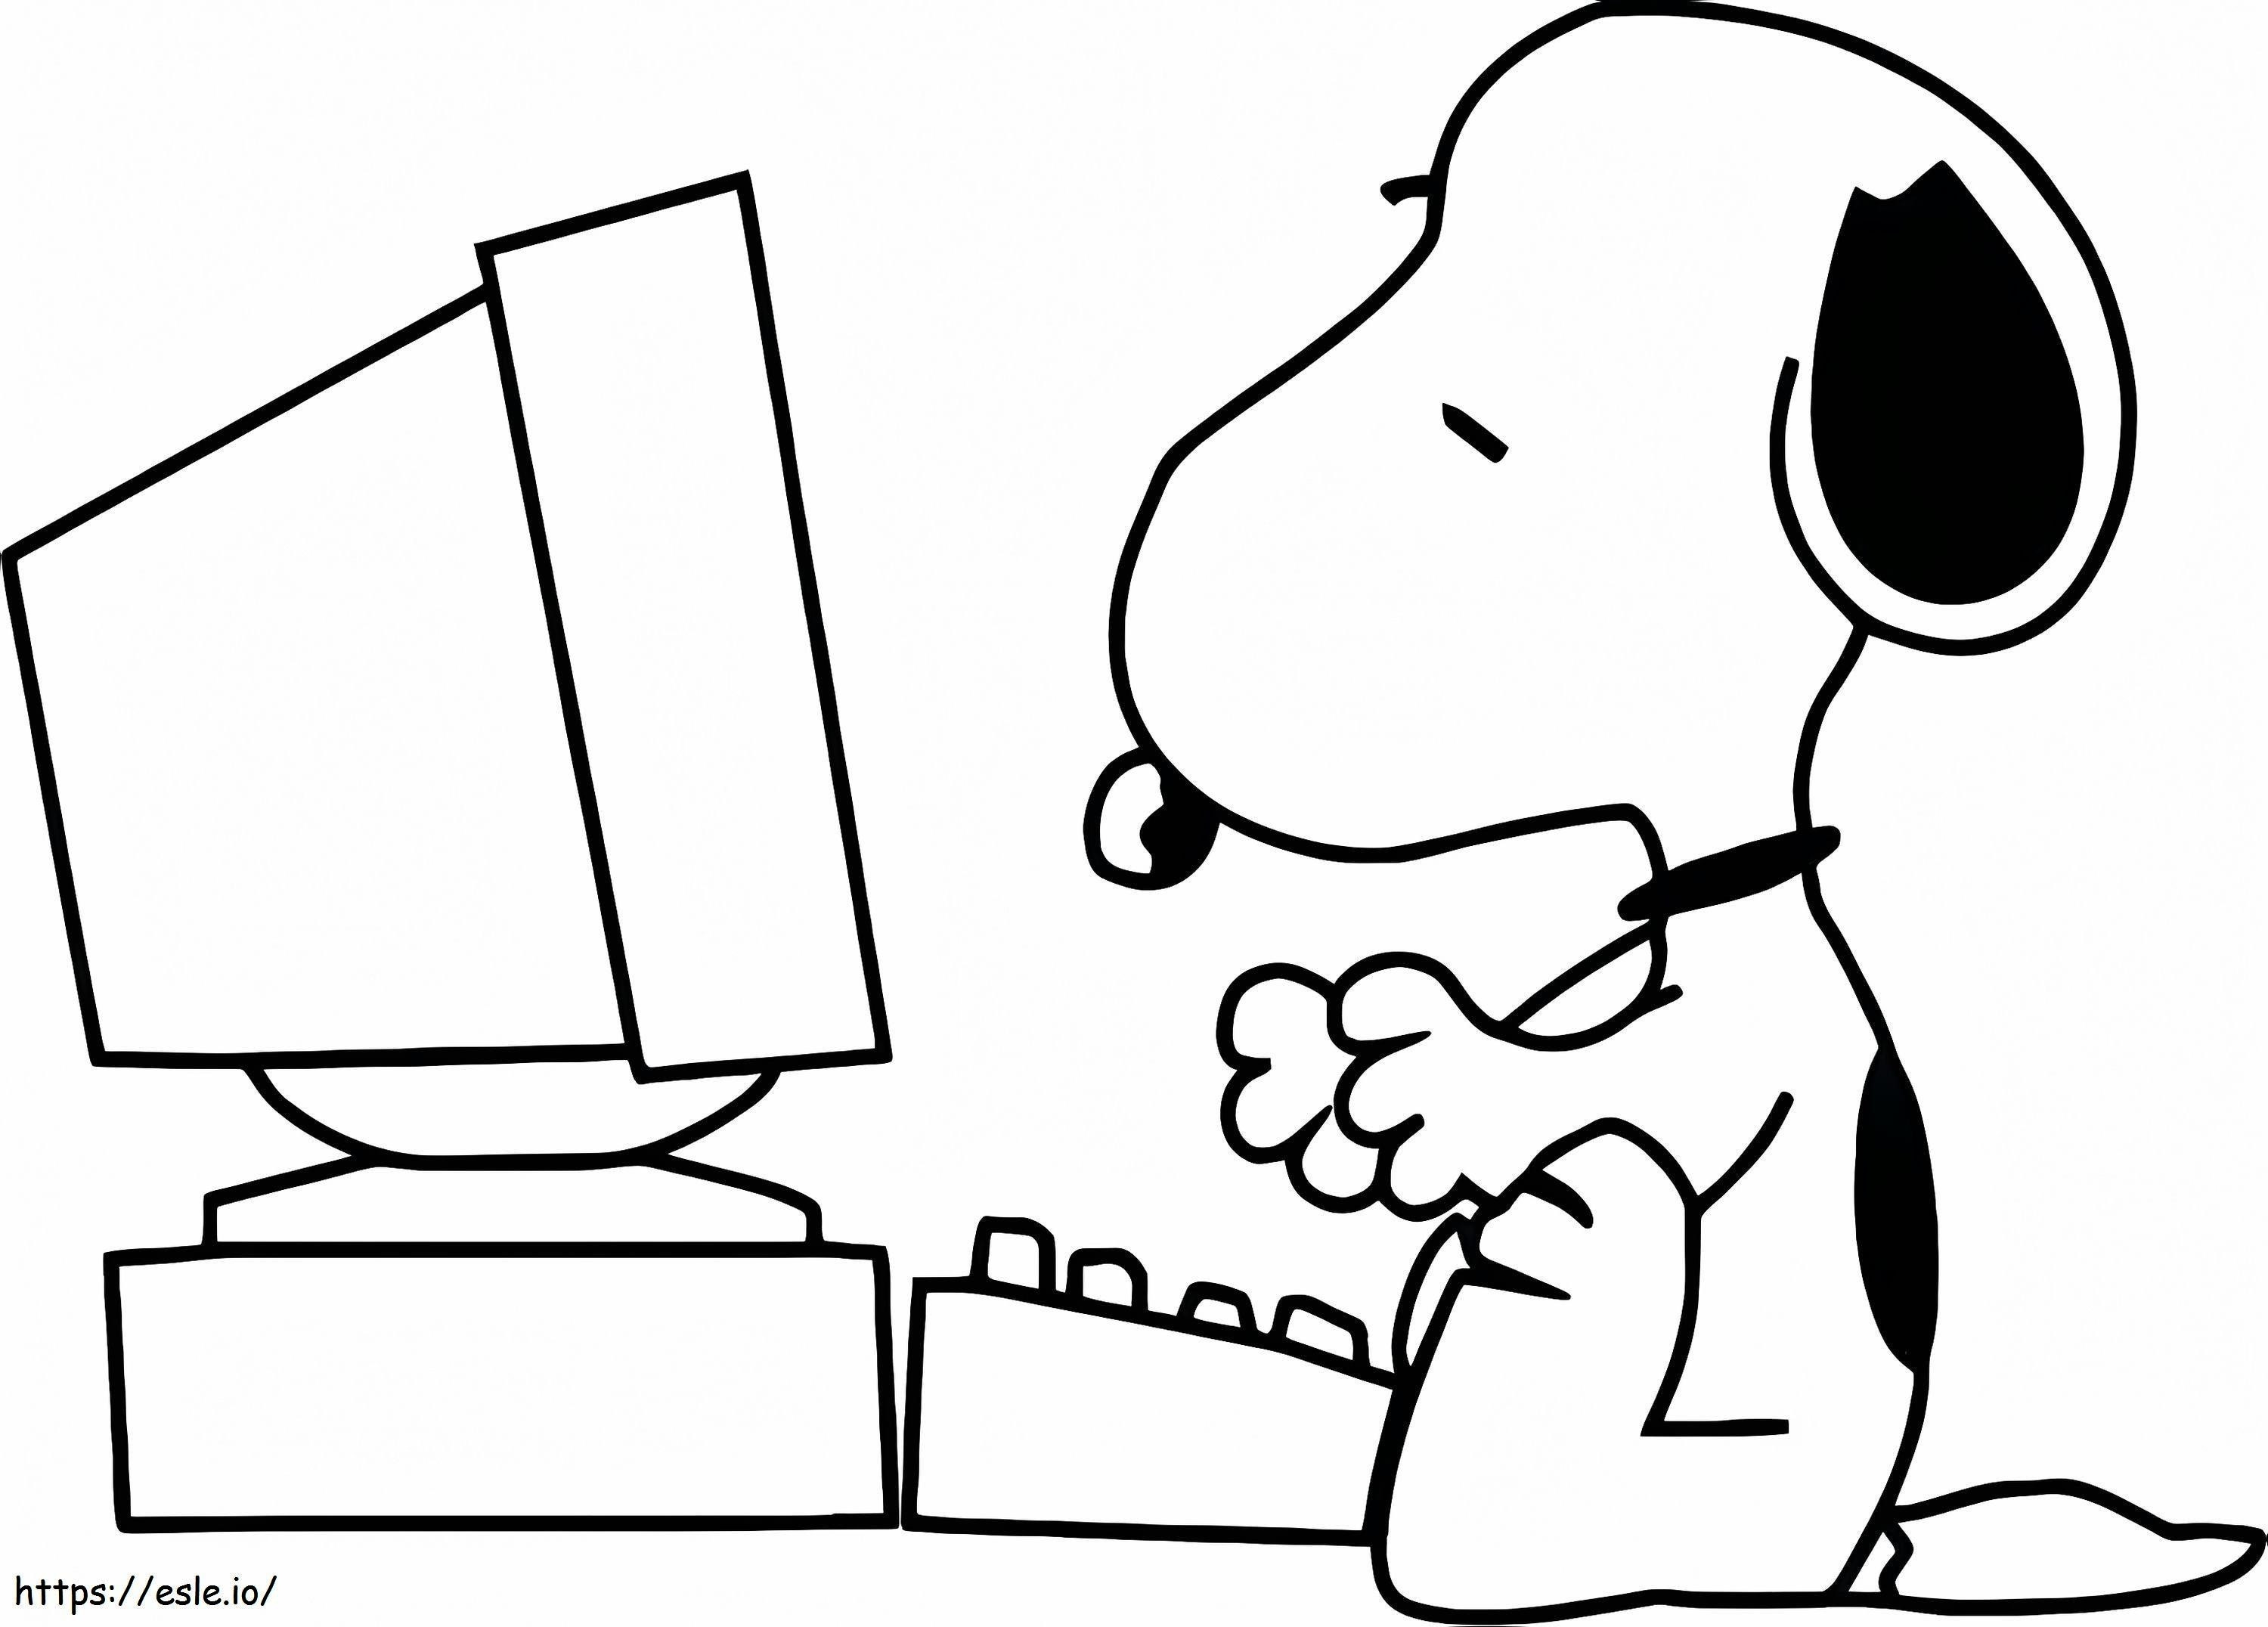 Snoopy With Computer coloring page